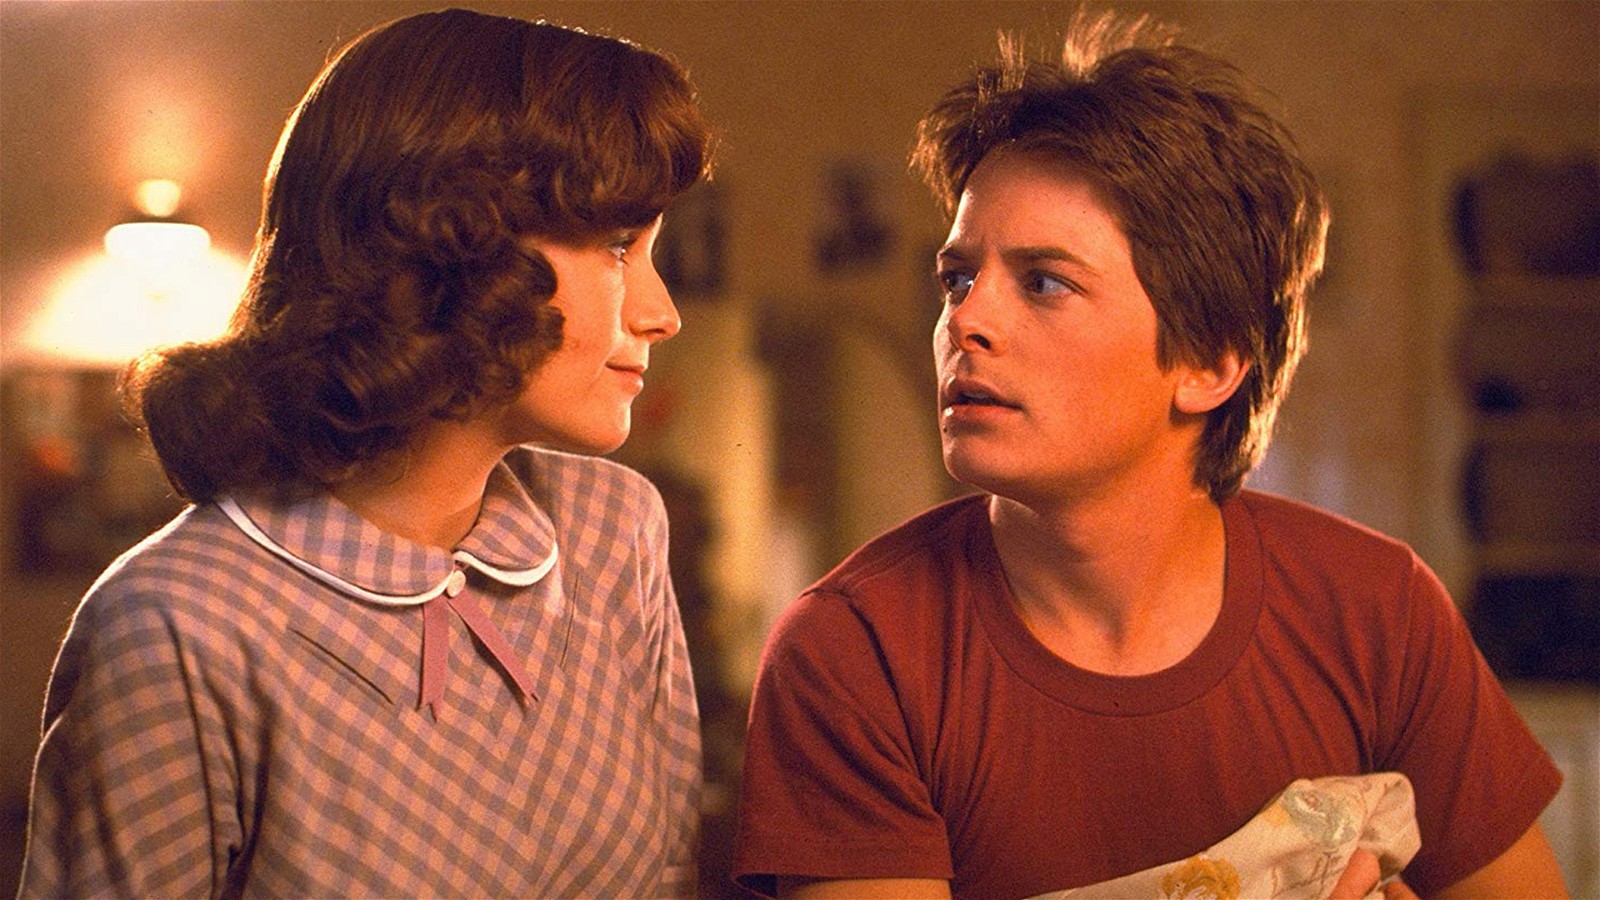 Michael J. Fox as Marty McFly in 1985's Back to the Future